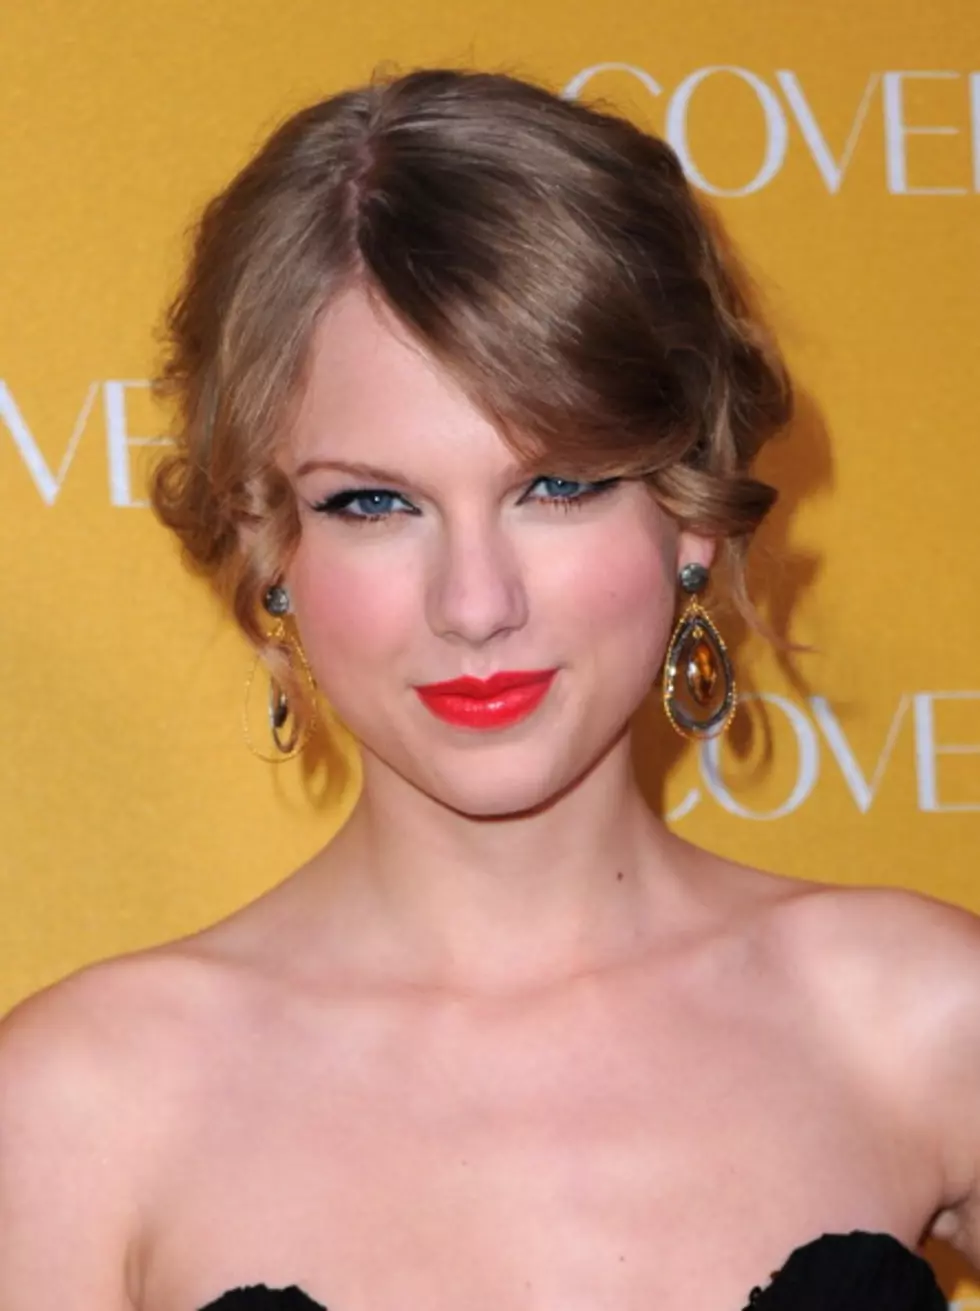 Alabama Student asks Taylor Swift to &#8220;Our Prom&#8221; [VIDEO]